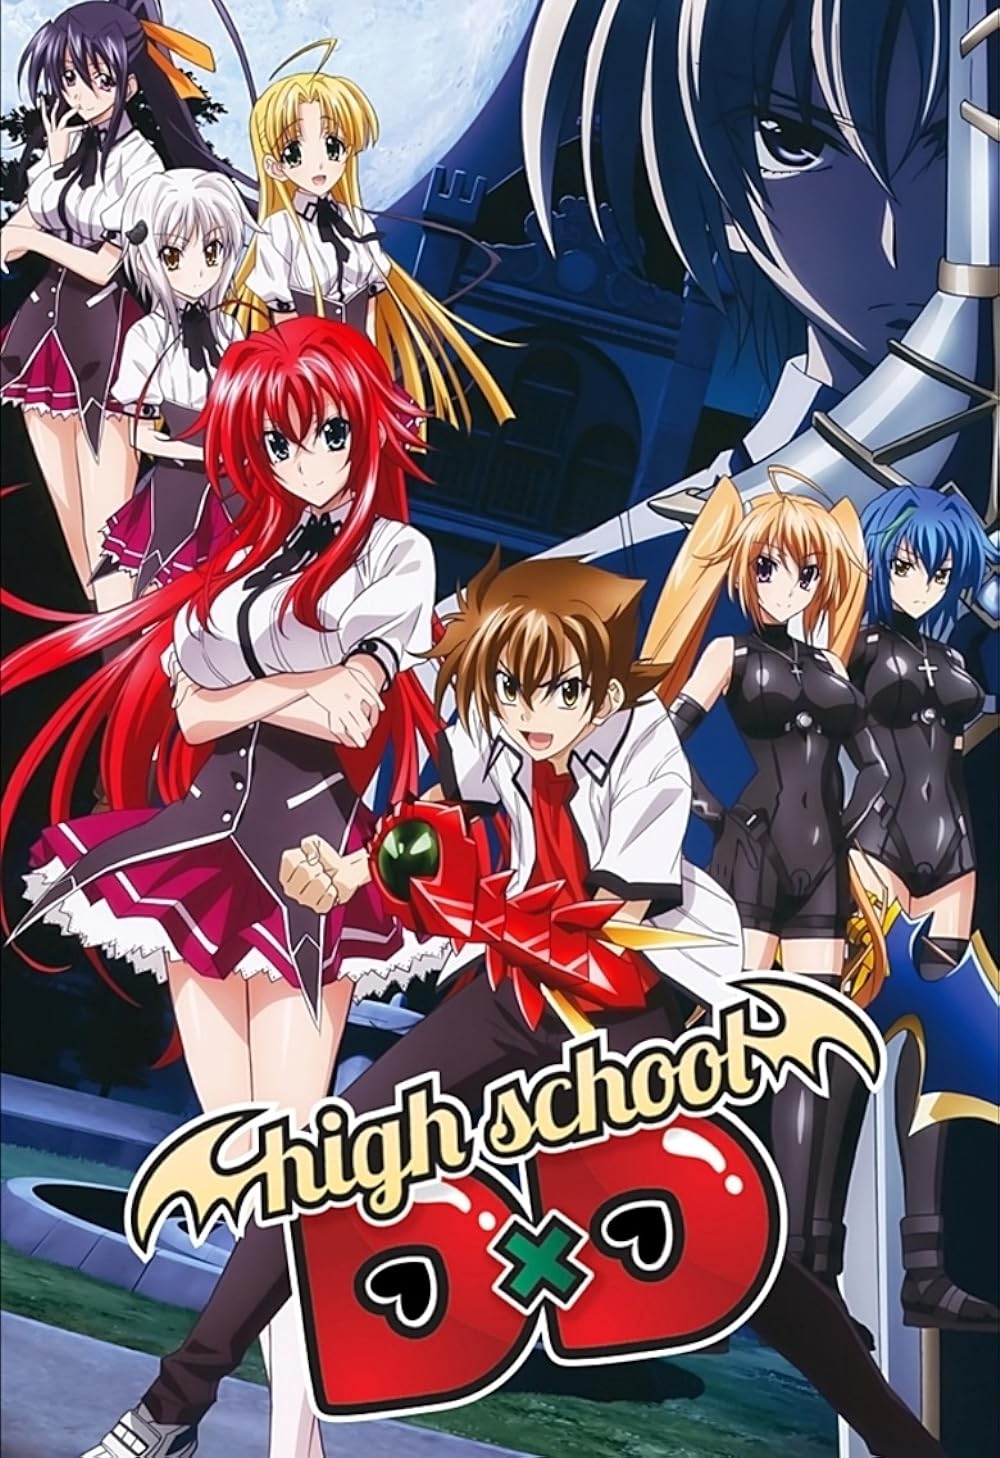 chase rivera recommends Watch Highschool Of The Dead Online